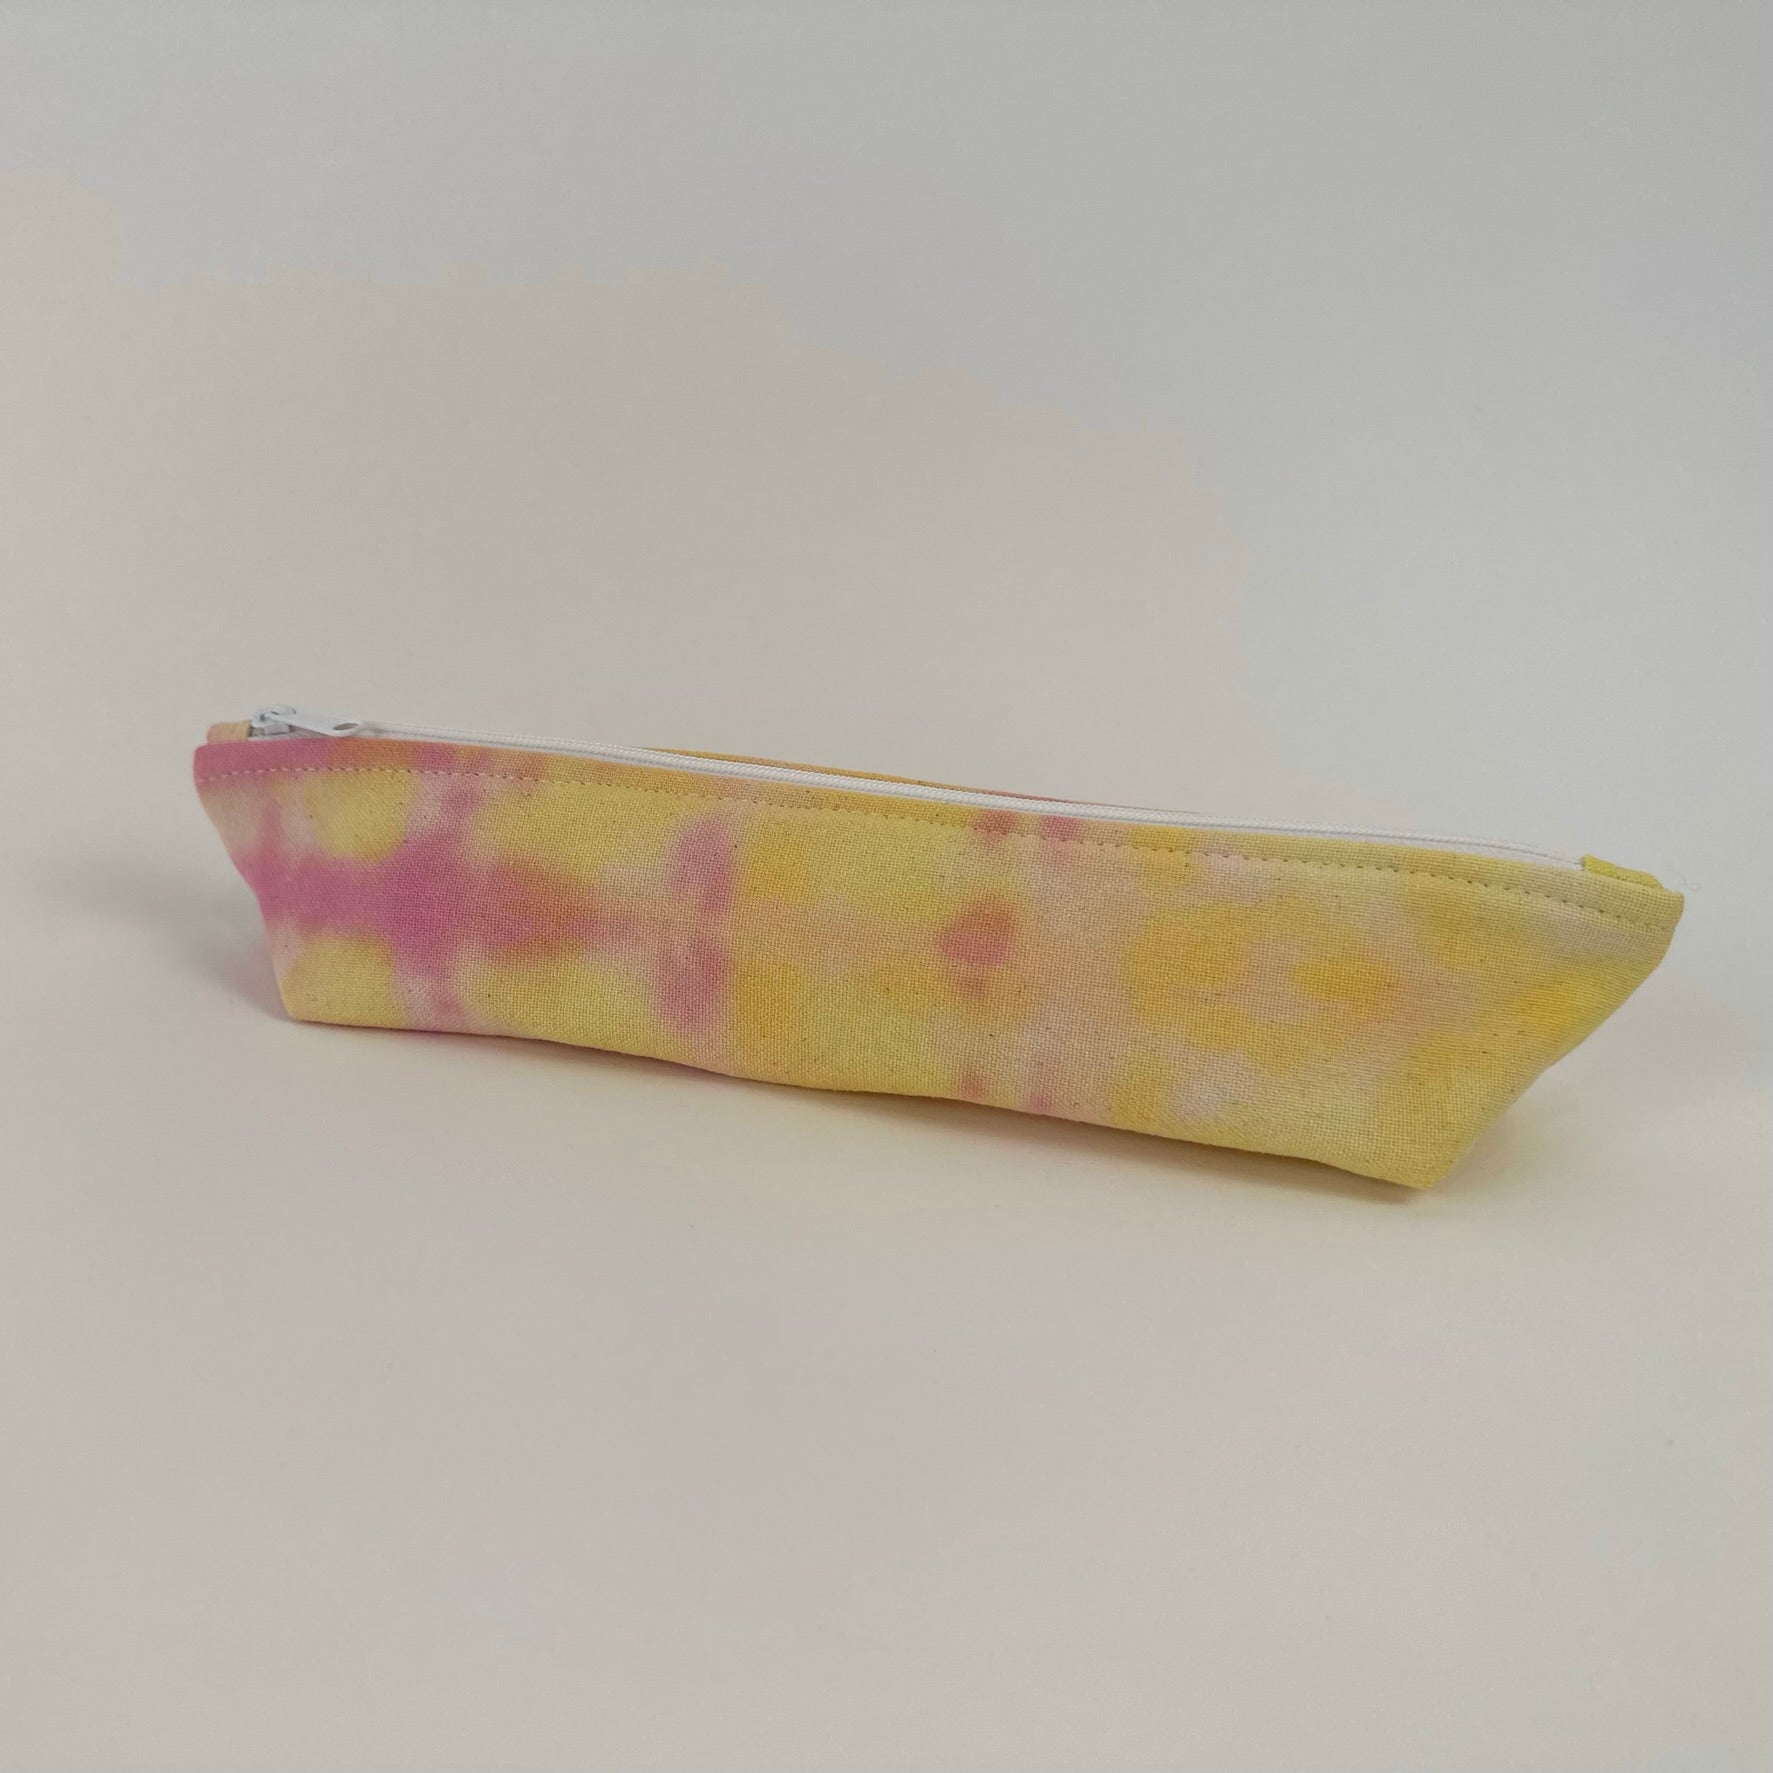 Back view of a Miche Niche zipper pouch in a hand dyed pink and yellow tie dye pattern